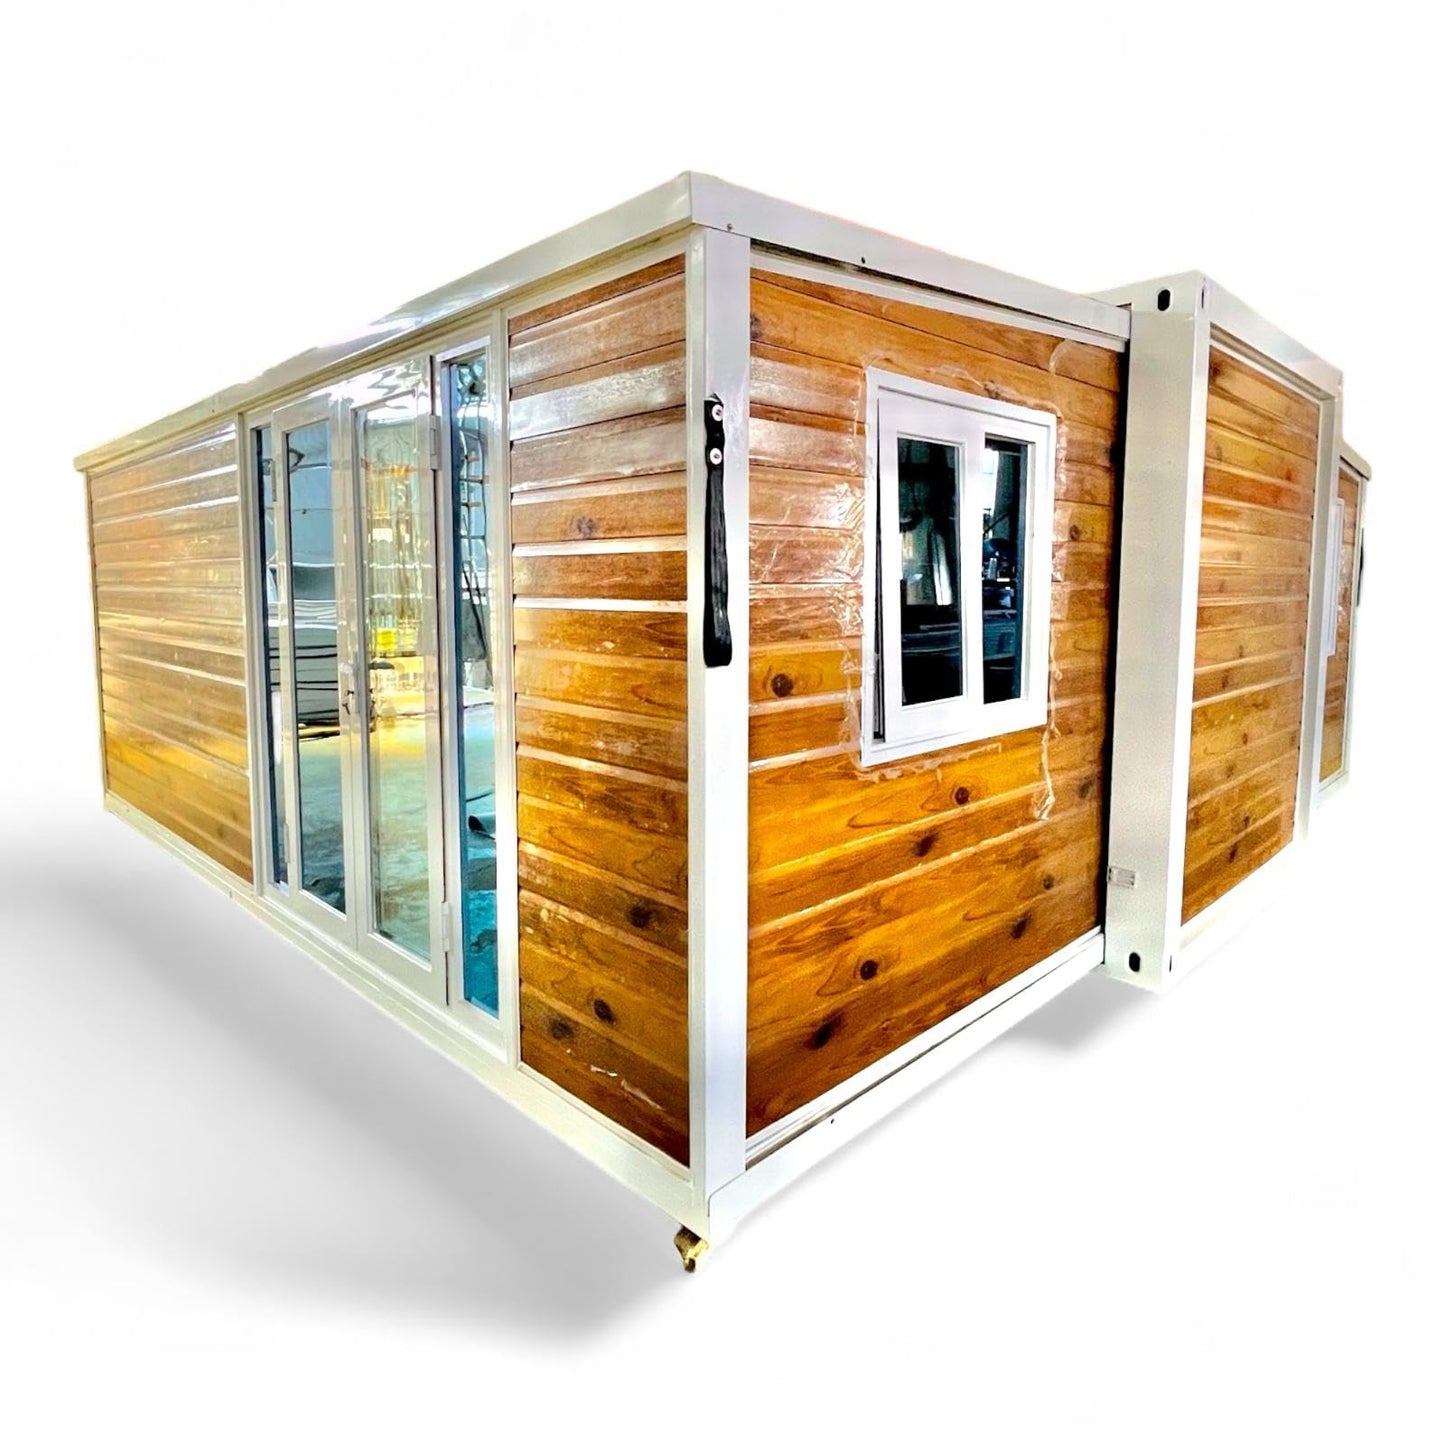 Portable Tiny House, 19x20ft - 1 Kitchen, 1 Bathroom, & 2 Rooms Ideal for Small Family Residence, Hotel, or Office, Perfect for Guest House or Villa, Offering a Foldable, Compact Living Solution.